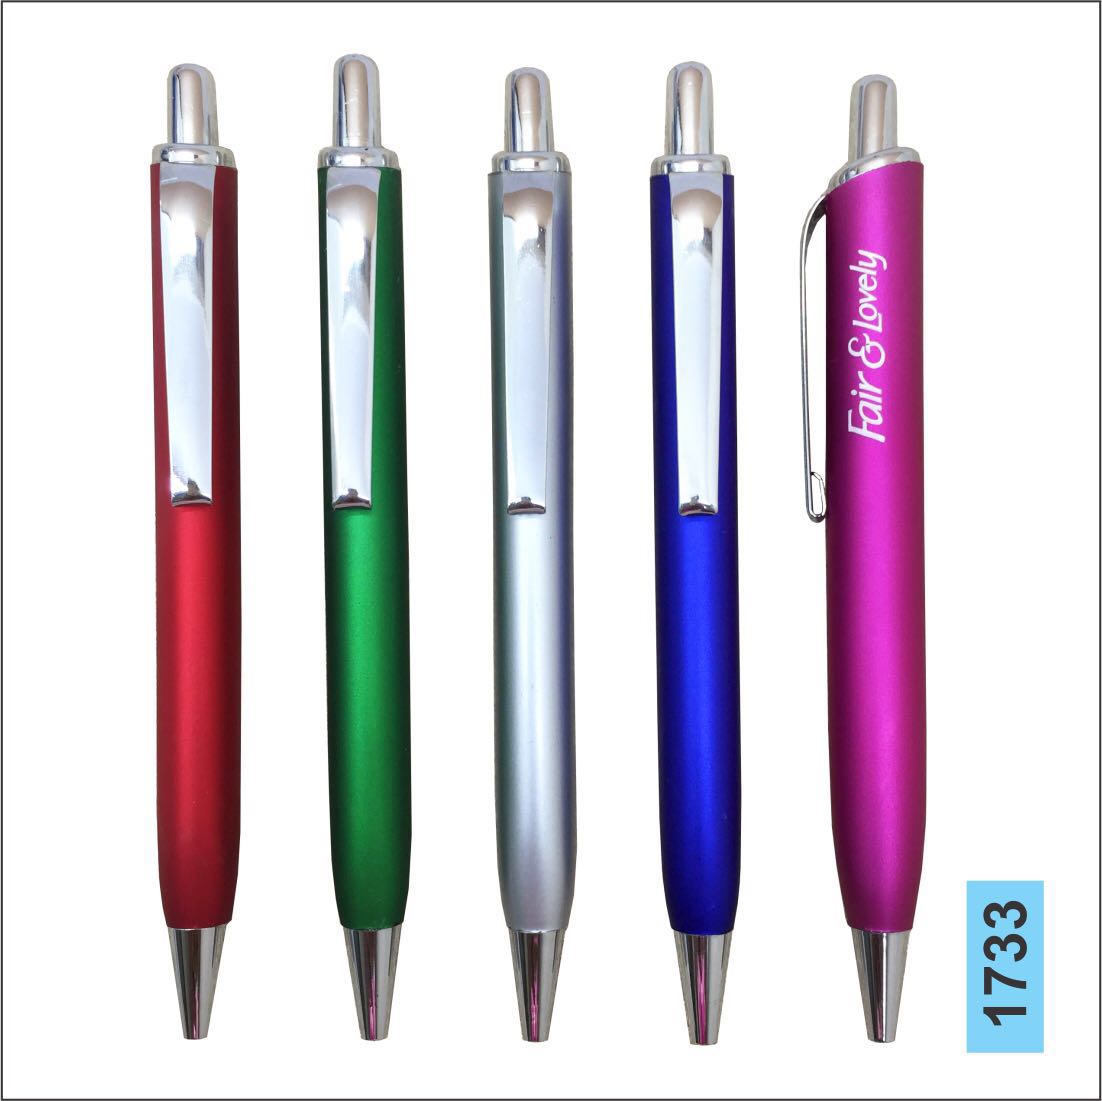 Power Bank Manufacturers in Ahmedabad